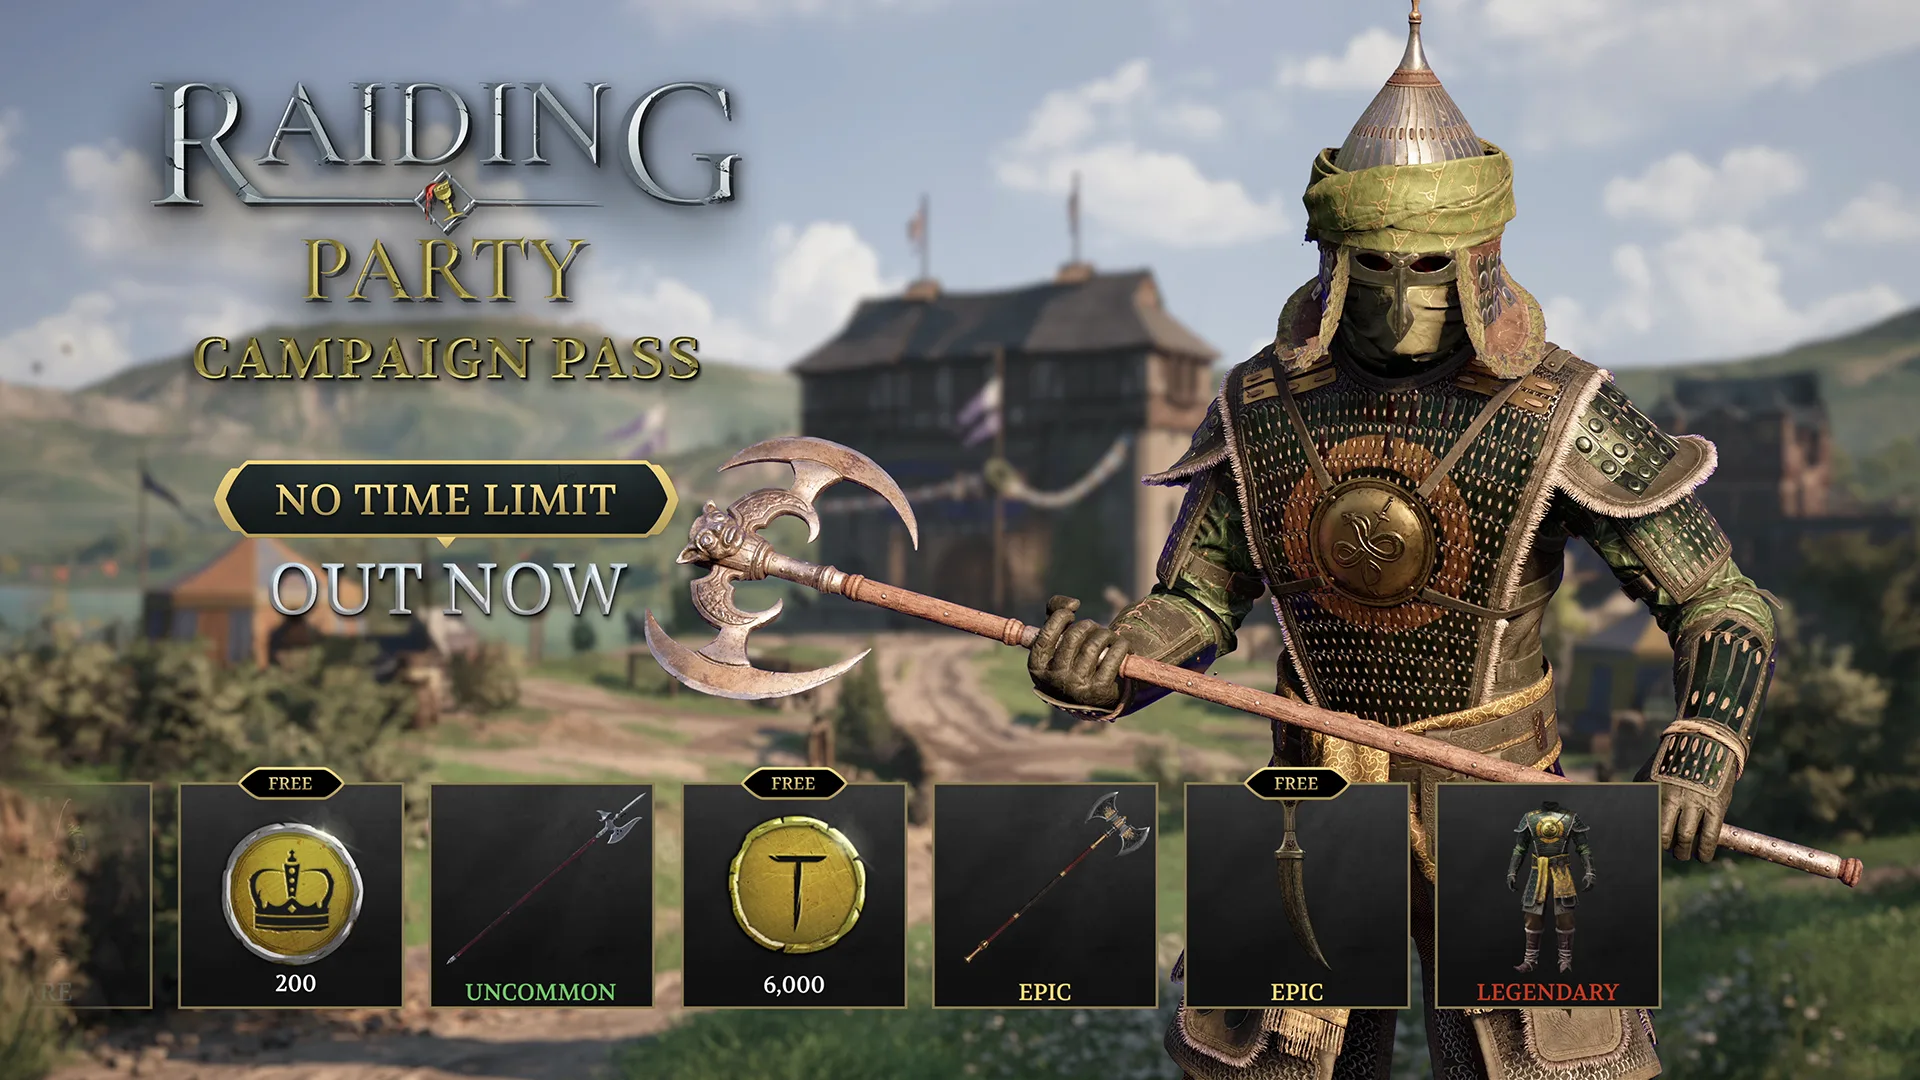 Chivalry 2 adds 500,000 new players following Game Pass debut